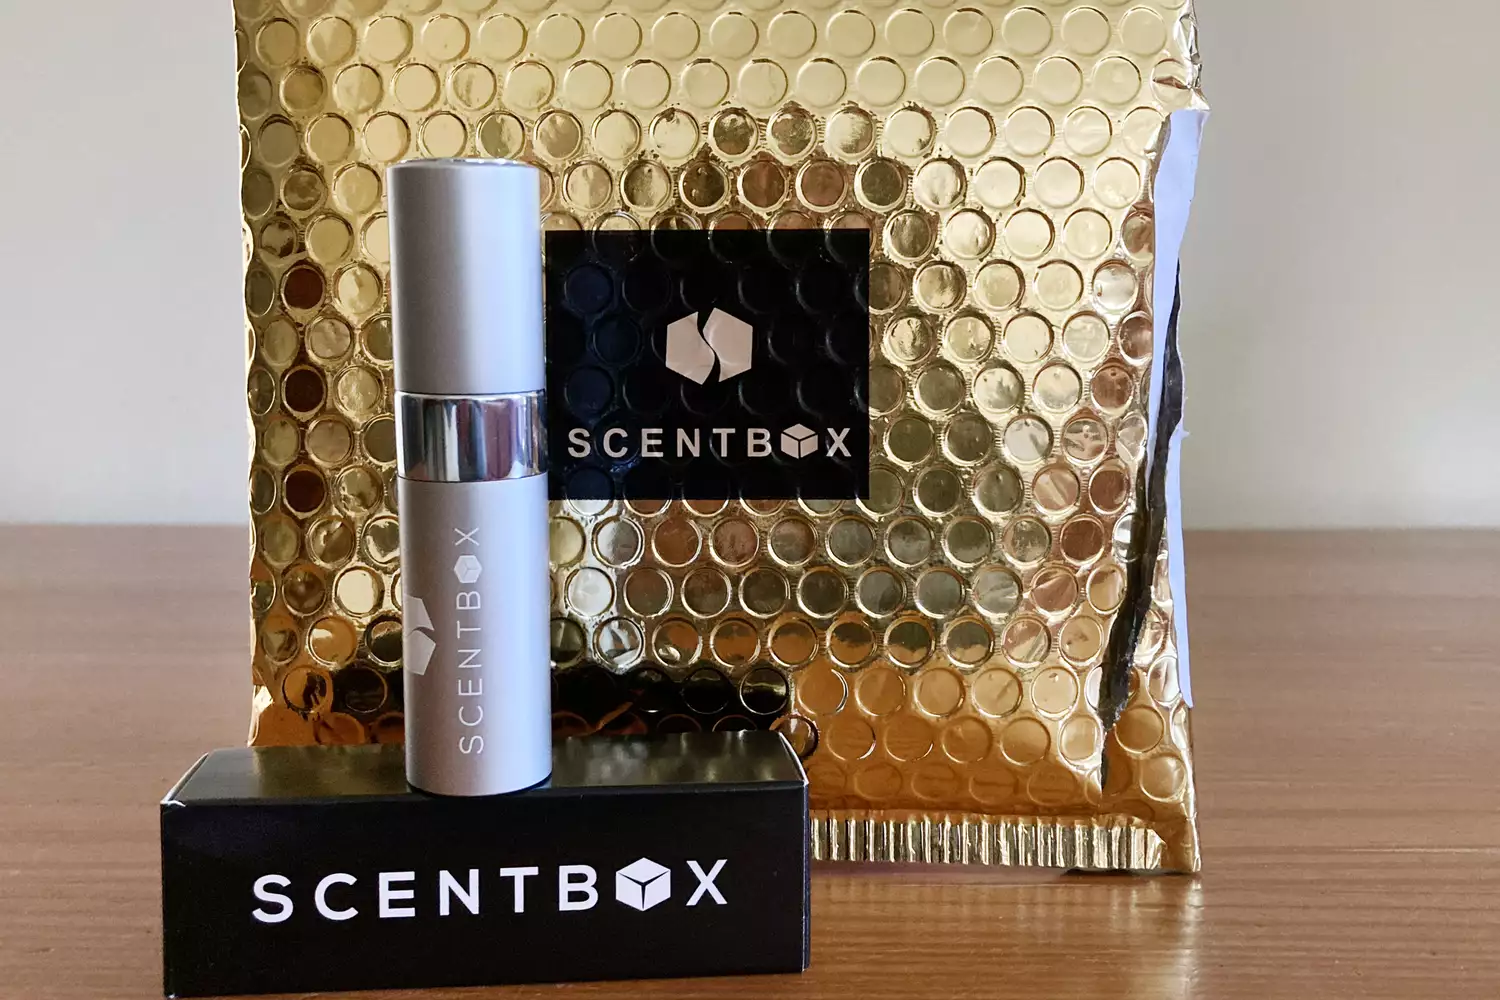 Scentbox product and packaging